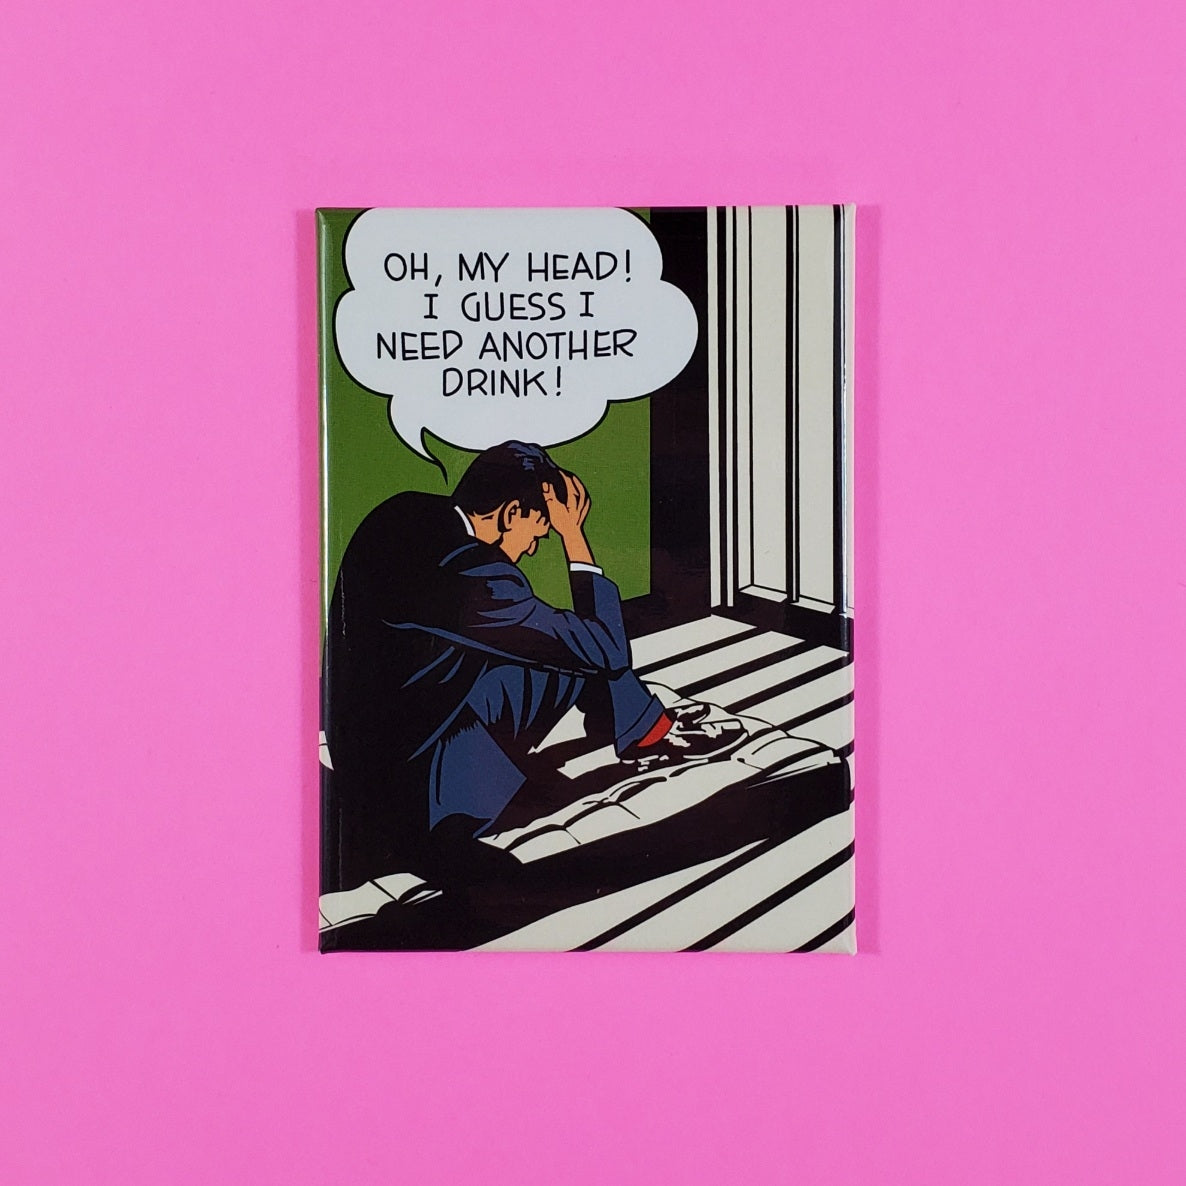 "Oh, my head! I guess I need another drink!" speech balloon man holding head retro illustrated image 2.5" x 3.5" rectangular refrigerator magnet